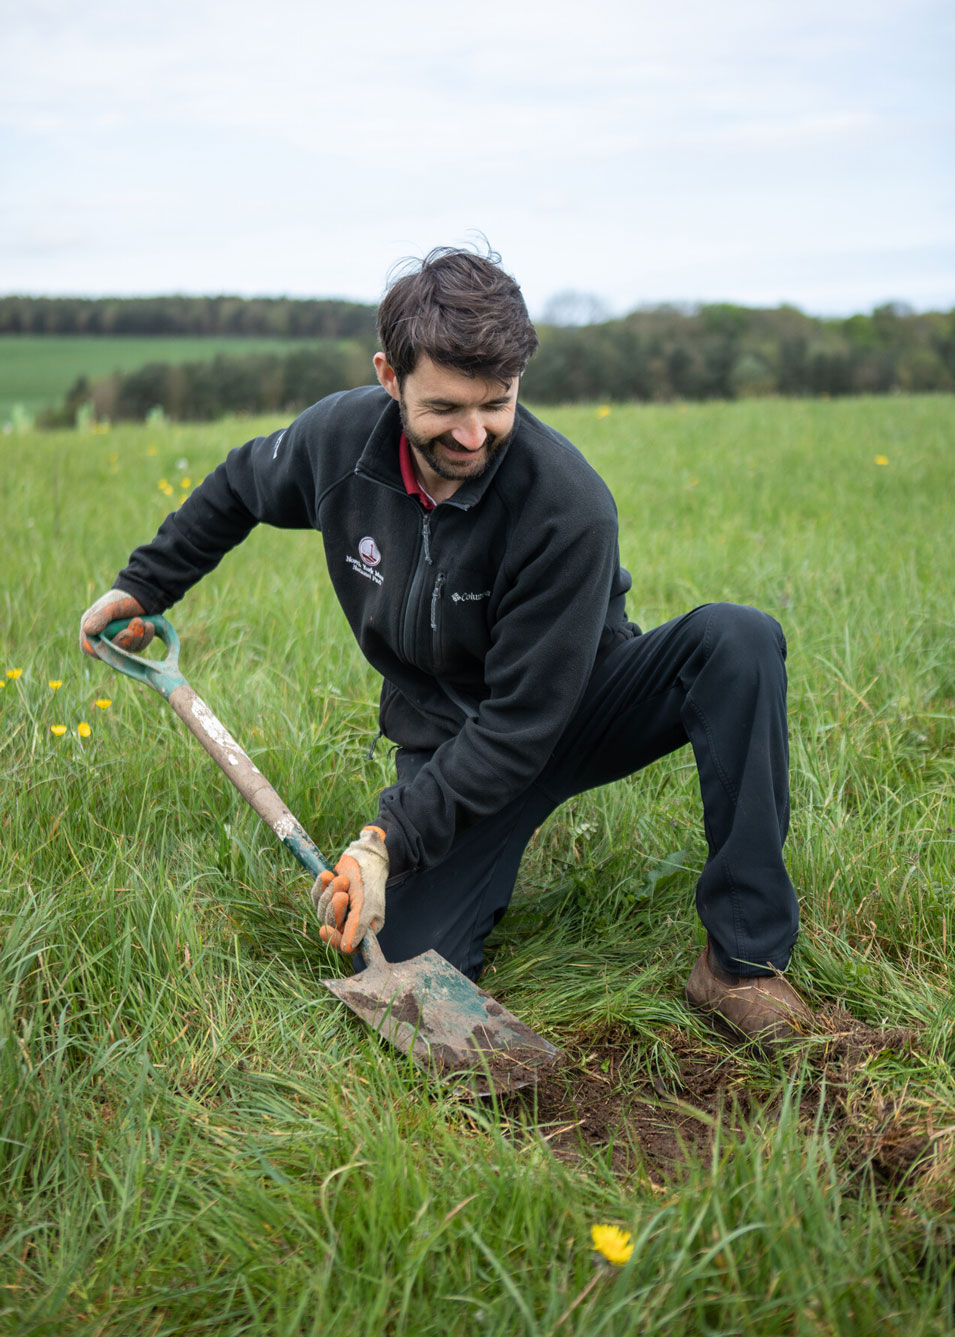 Man digging into soil with a spade in a field. Credit Charlie Fox.